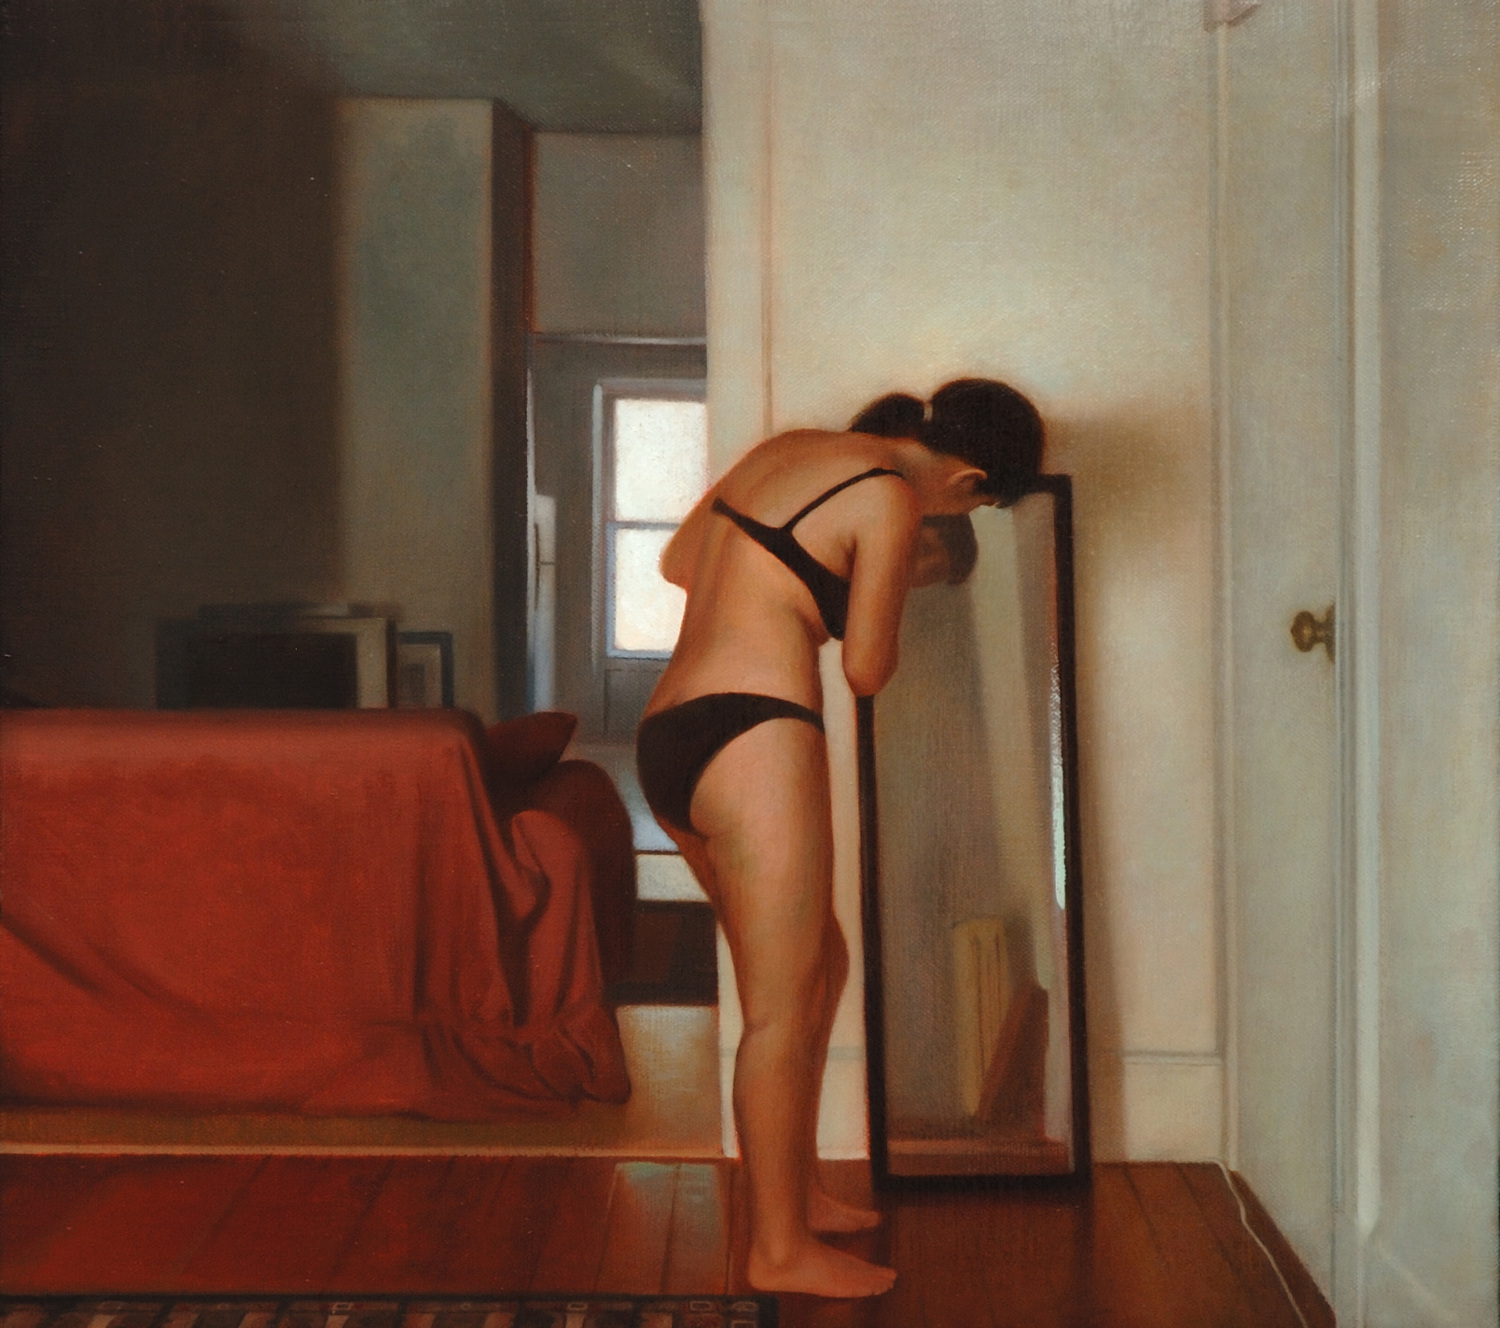   Contortion , 2007, Oil on linen, 18 x 24 inches, Private collection 